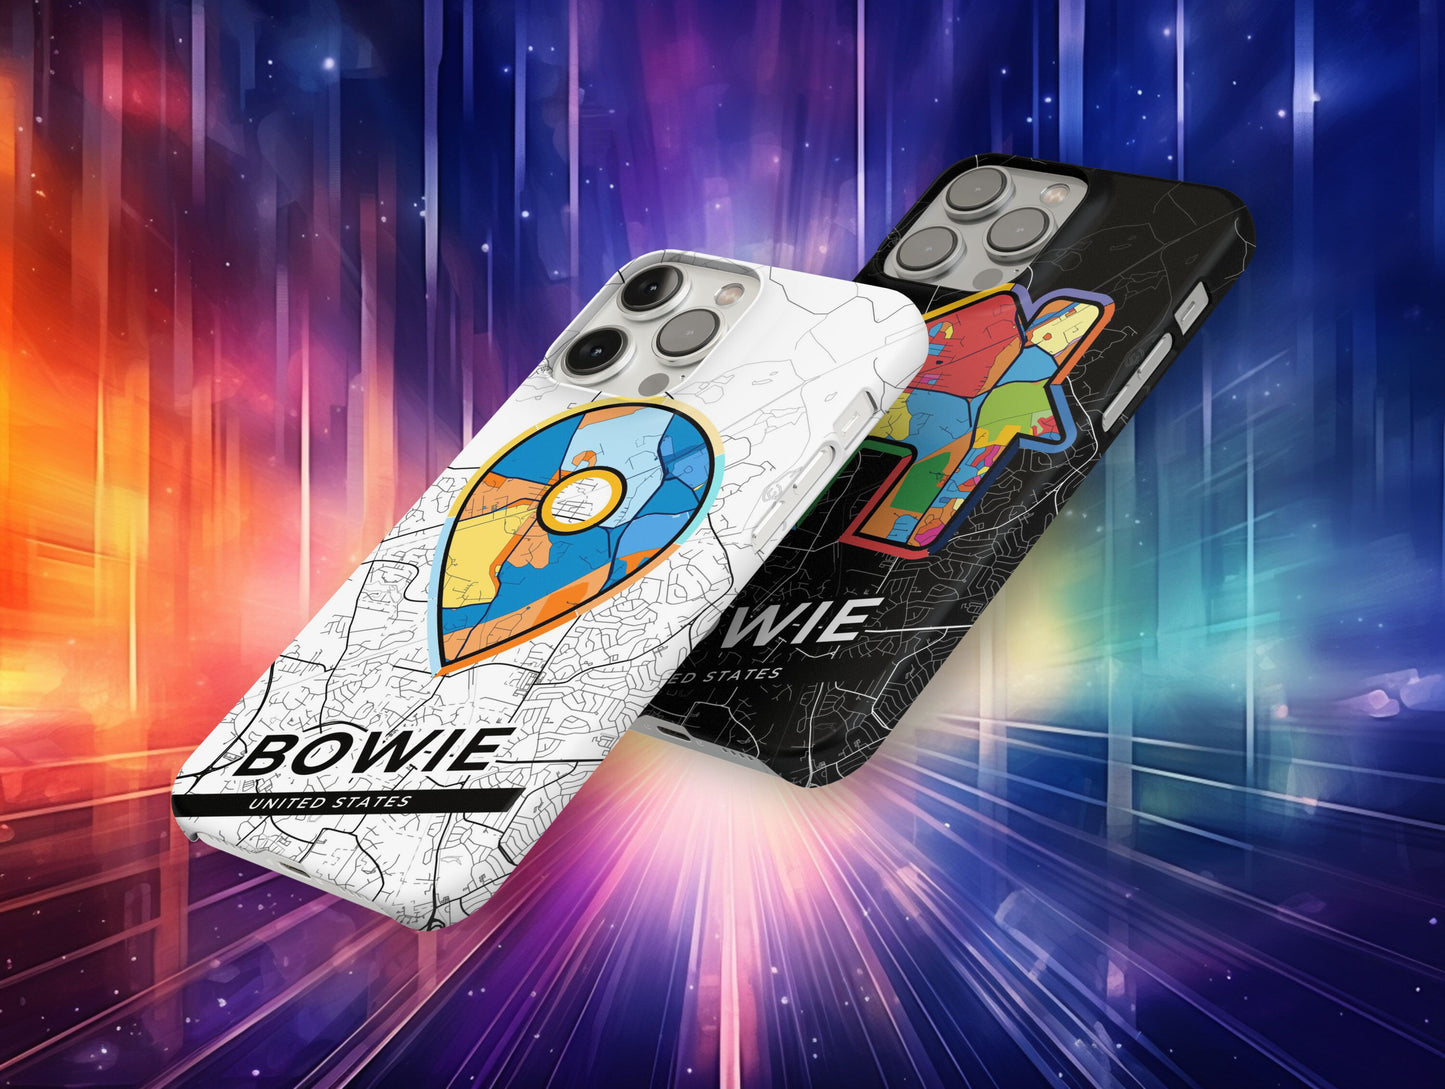 Bowie Maryland slim phone case with colorful icon. Birthday, wedding or housewarming gift. Couple match cases.